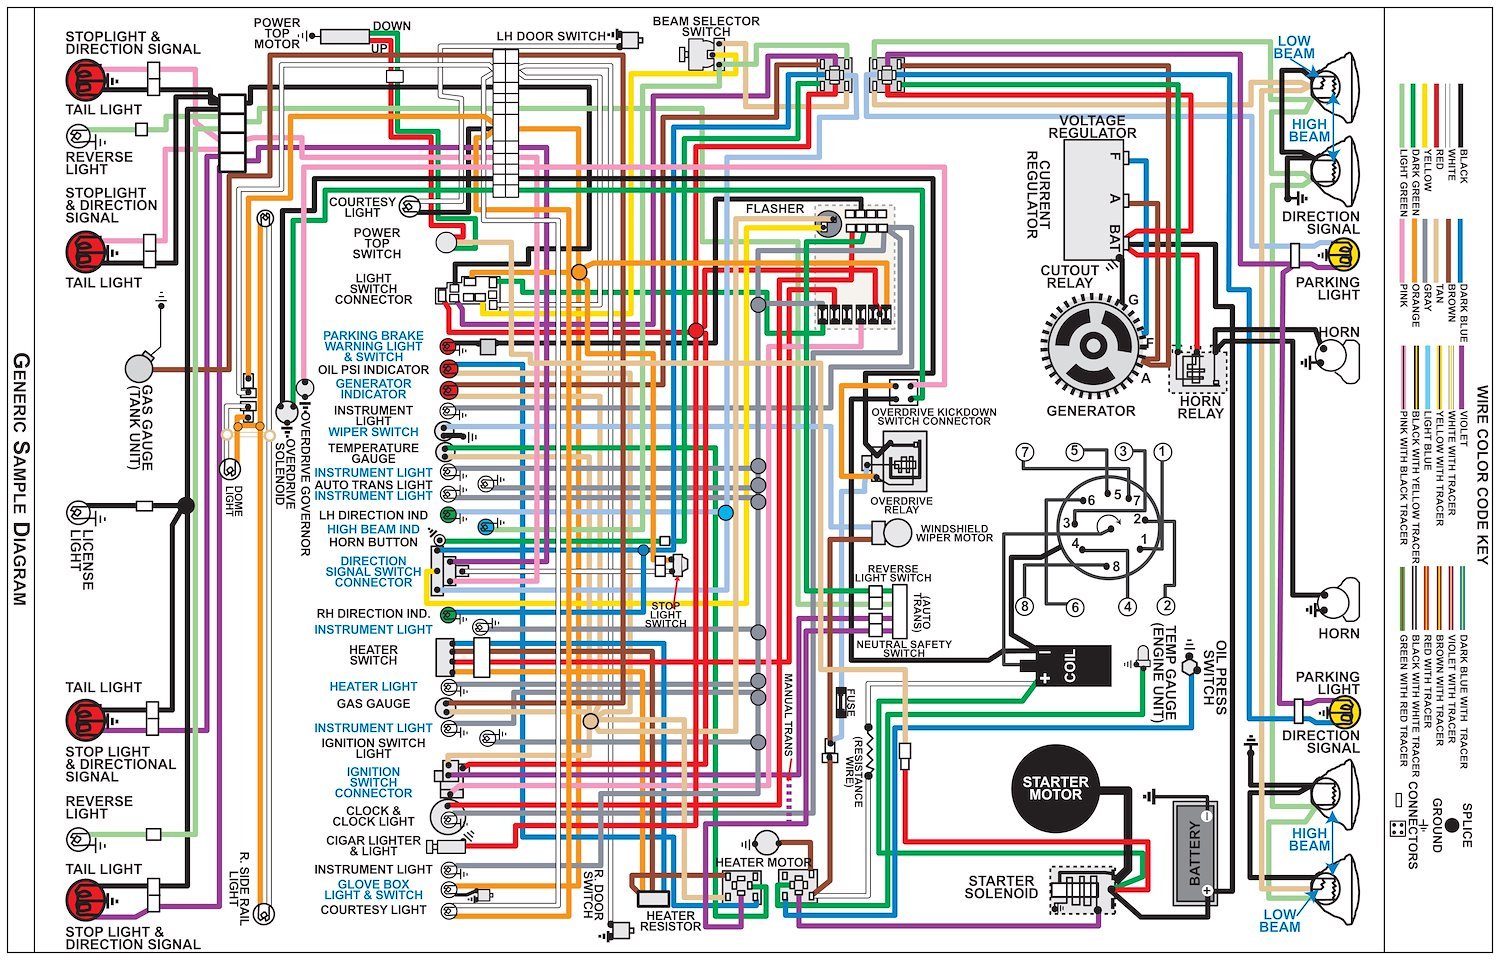 Wiring Diagram for 1971 Ford Mustang, 11 in x 17 in., Laminated